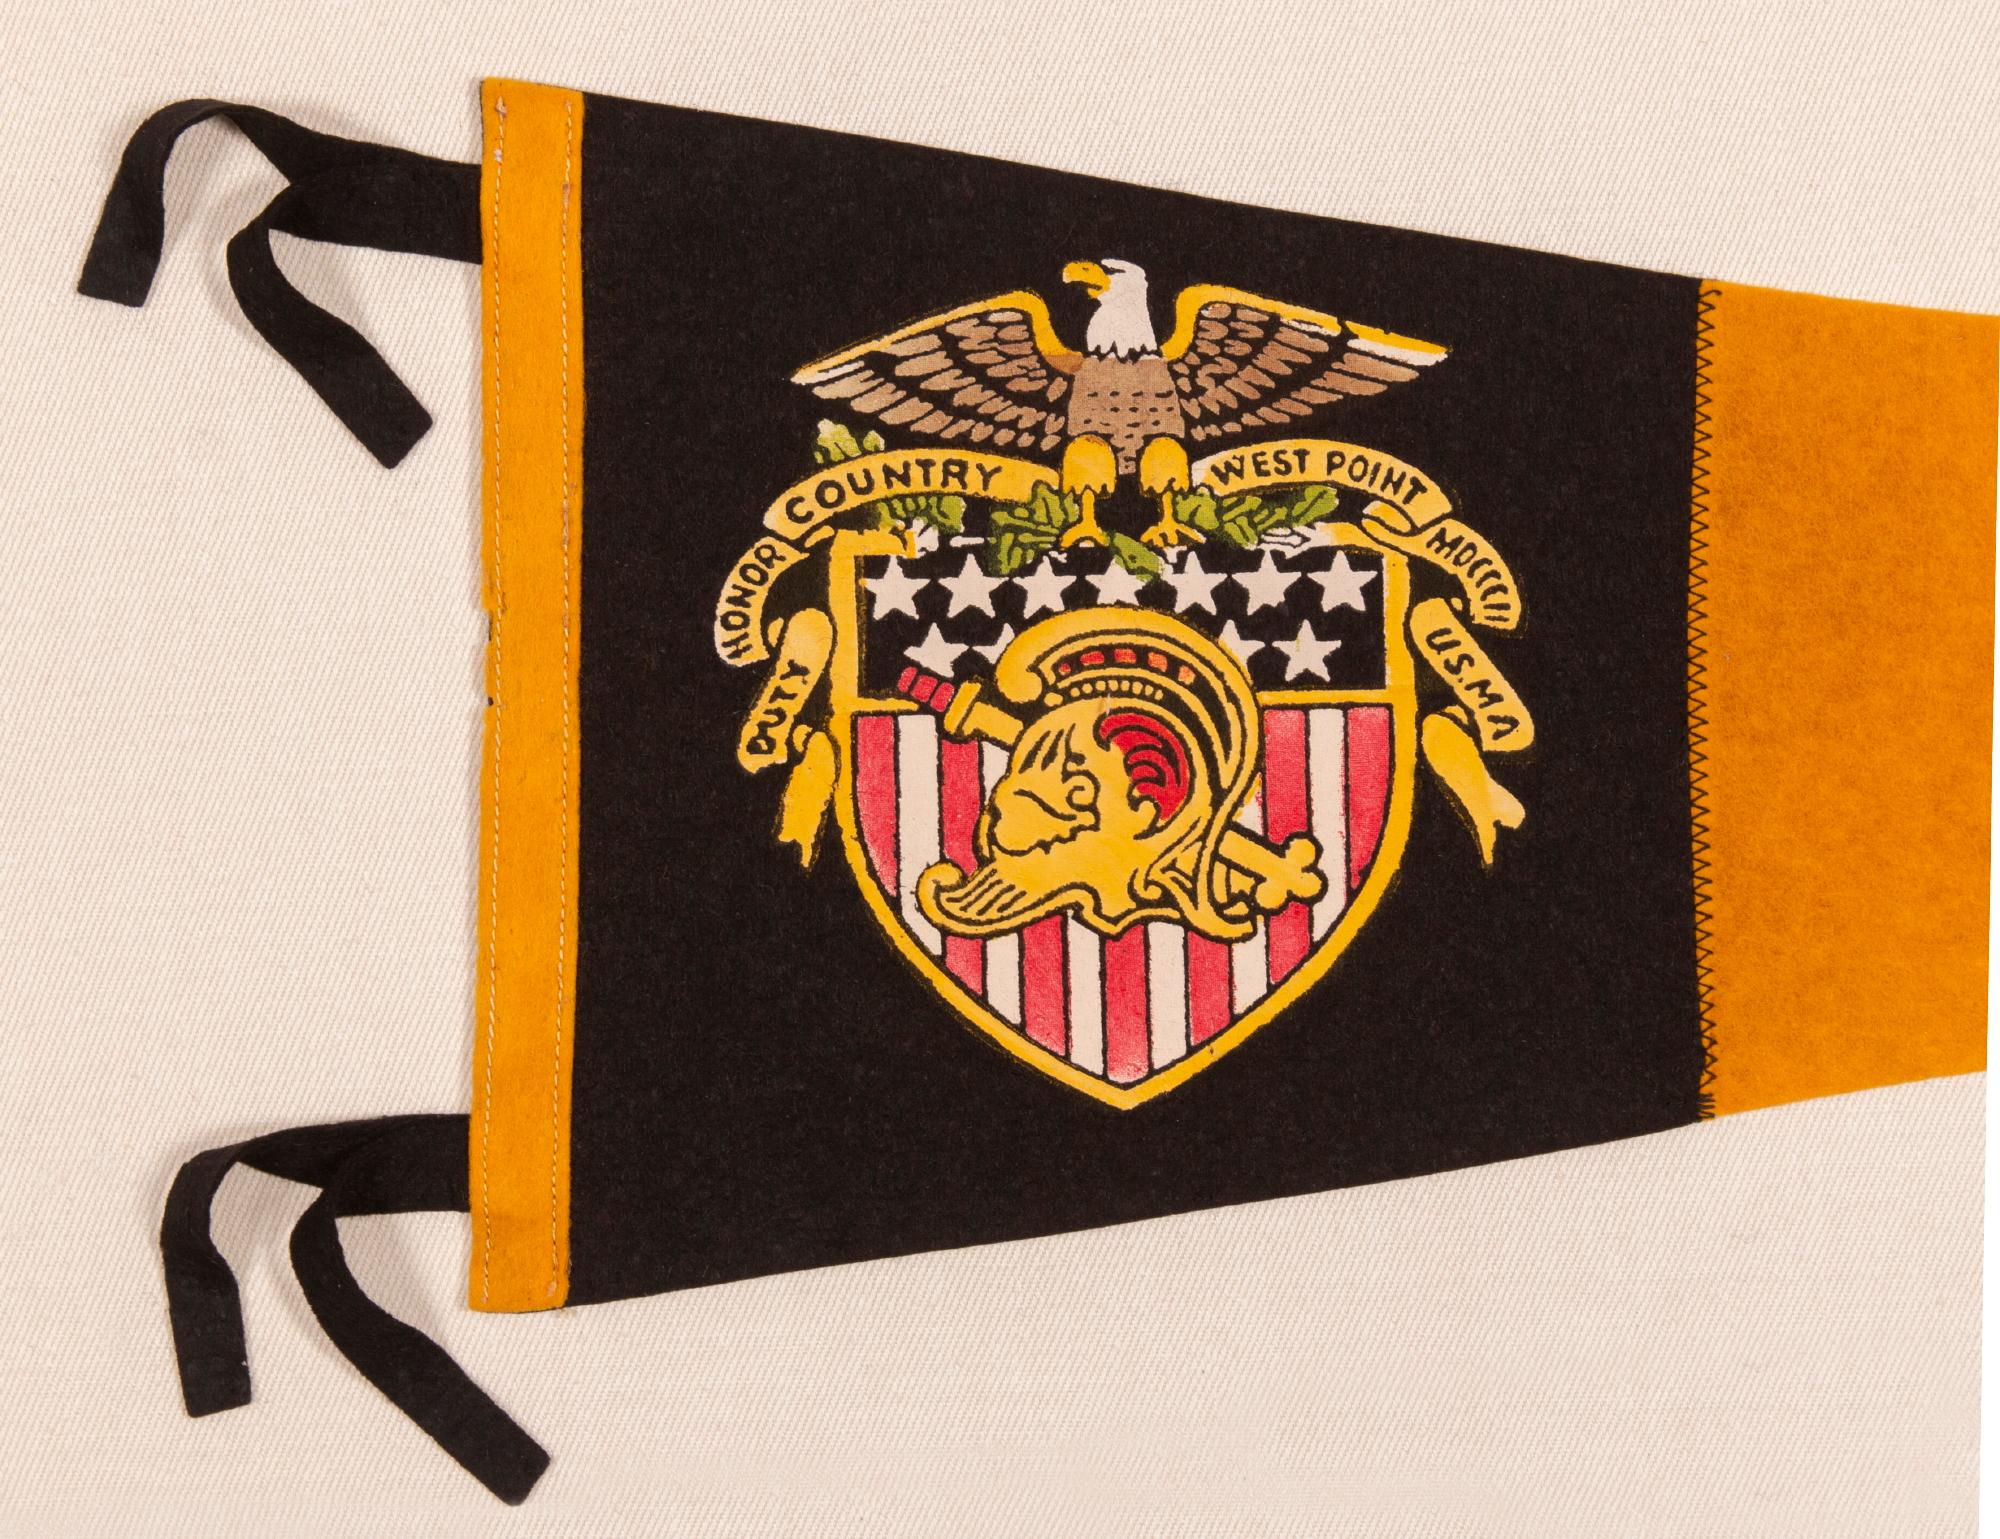 WEST POINT PENNANT WITH STRIKING COLOR & GRAPHICS, WWII ERA - 1950's

Triangular pennant, made for the United States Military Academy at West Point, with exceptional colors and graphics. Made of golden yellow and black felted wool, the Academy's